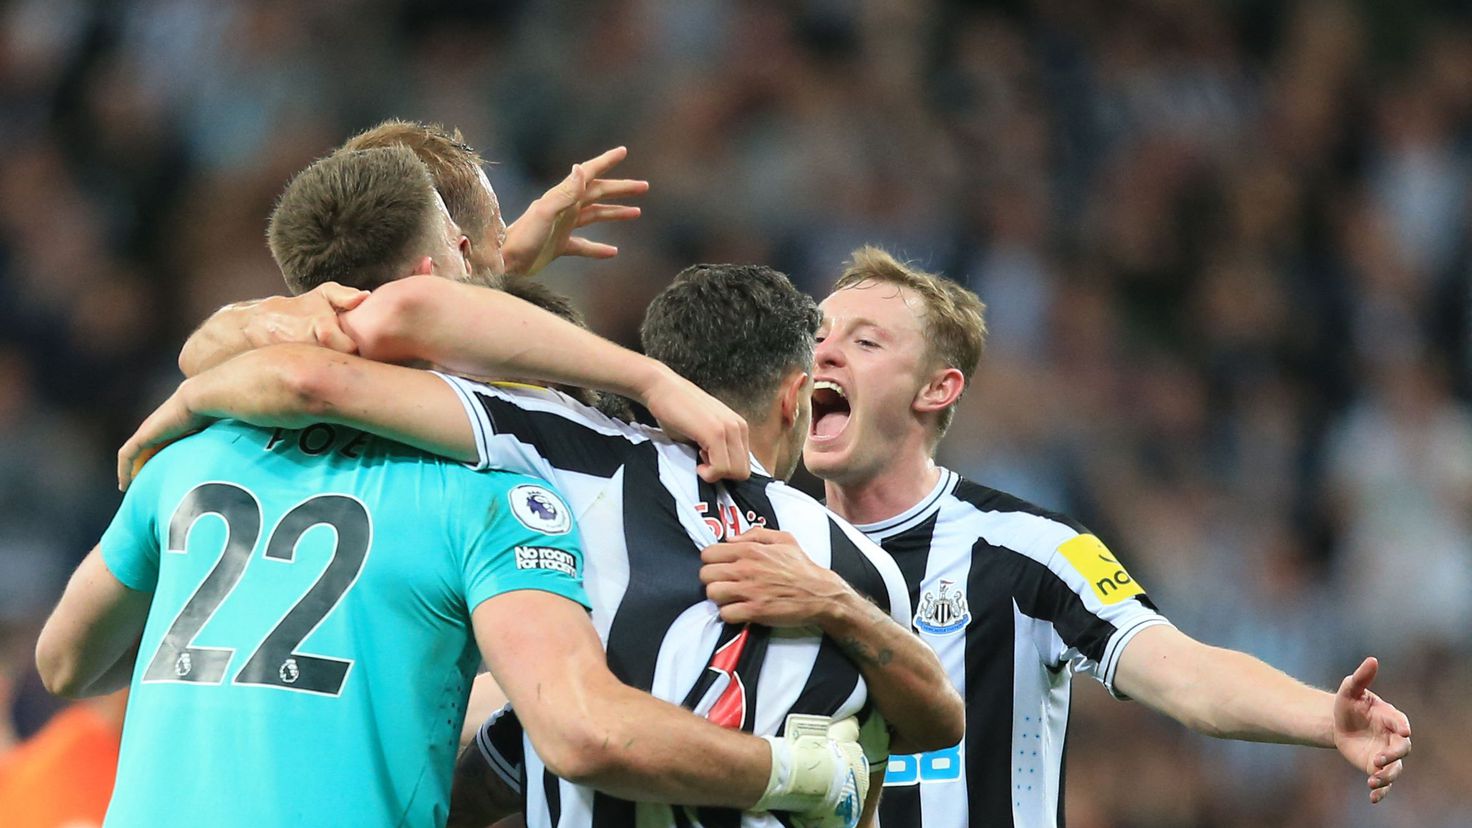 Newcastle is Champions
